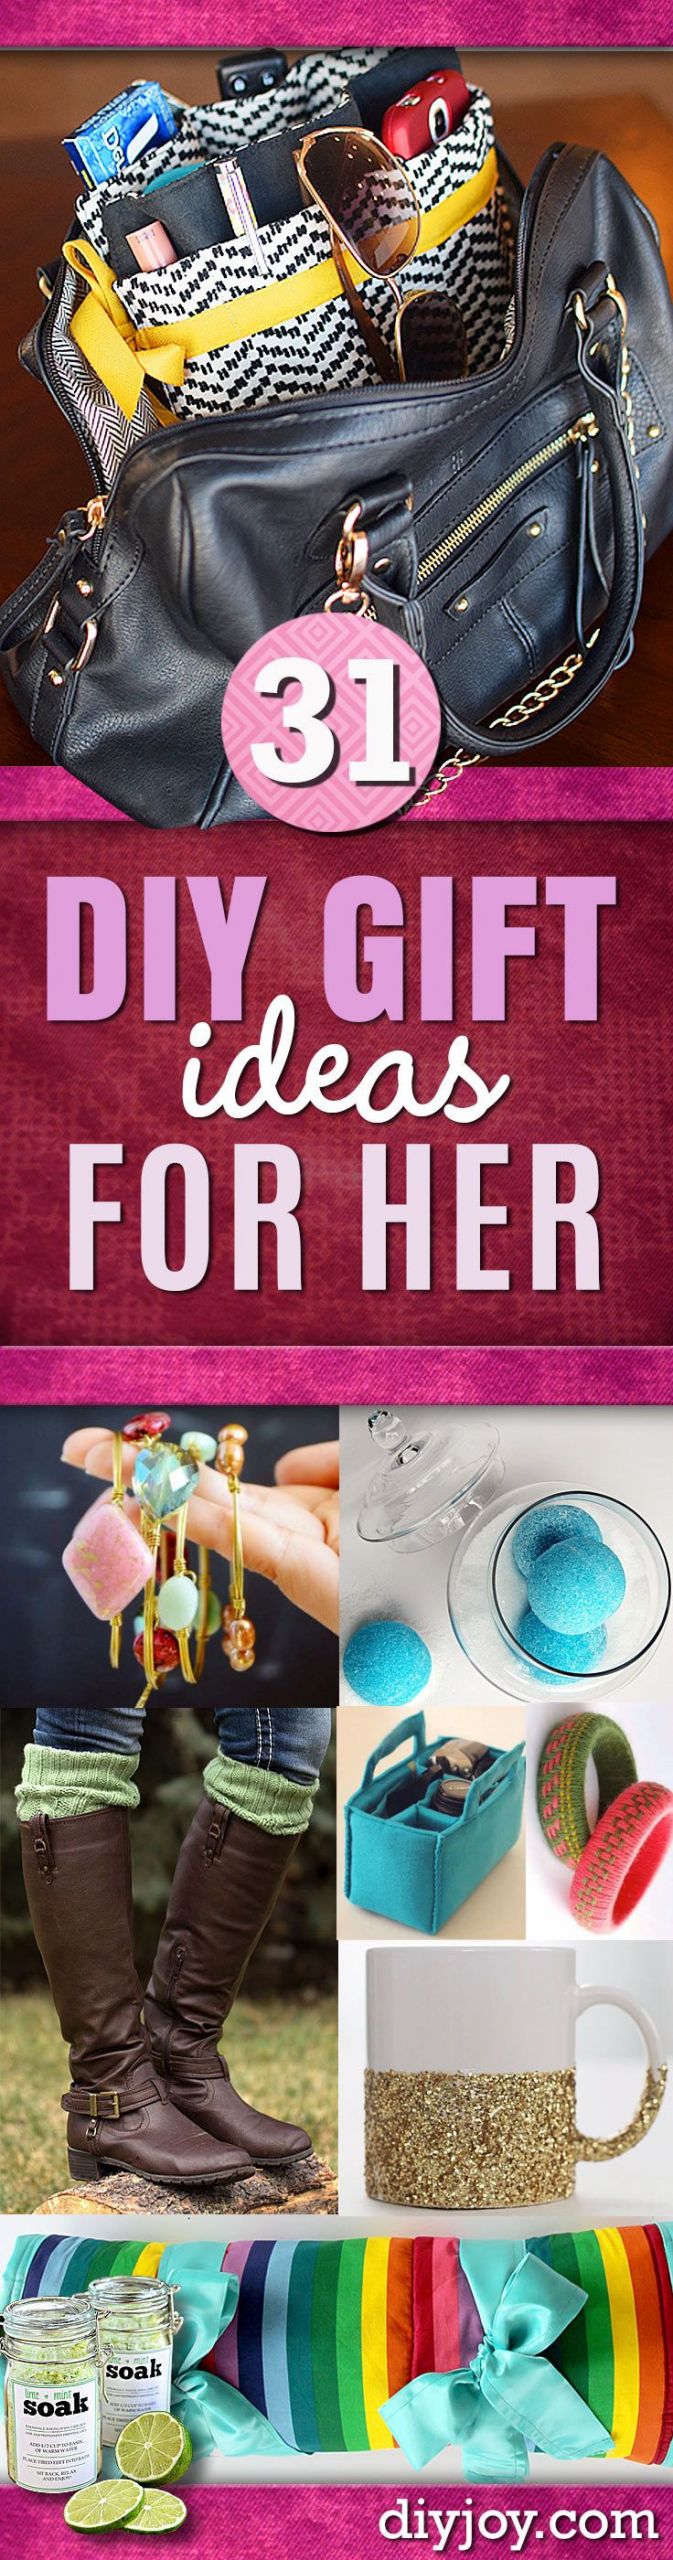 DIY Christmas Gifts For Wife
 DIY Gift Ideas for Her